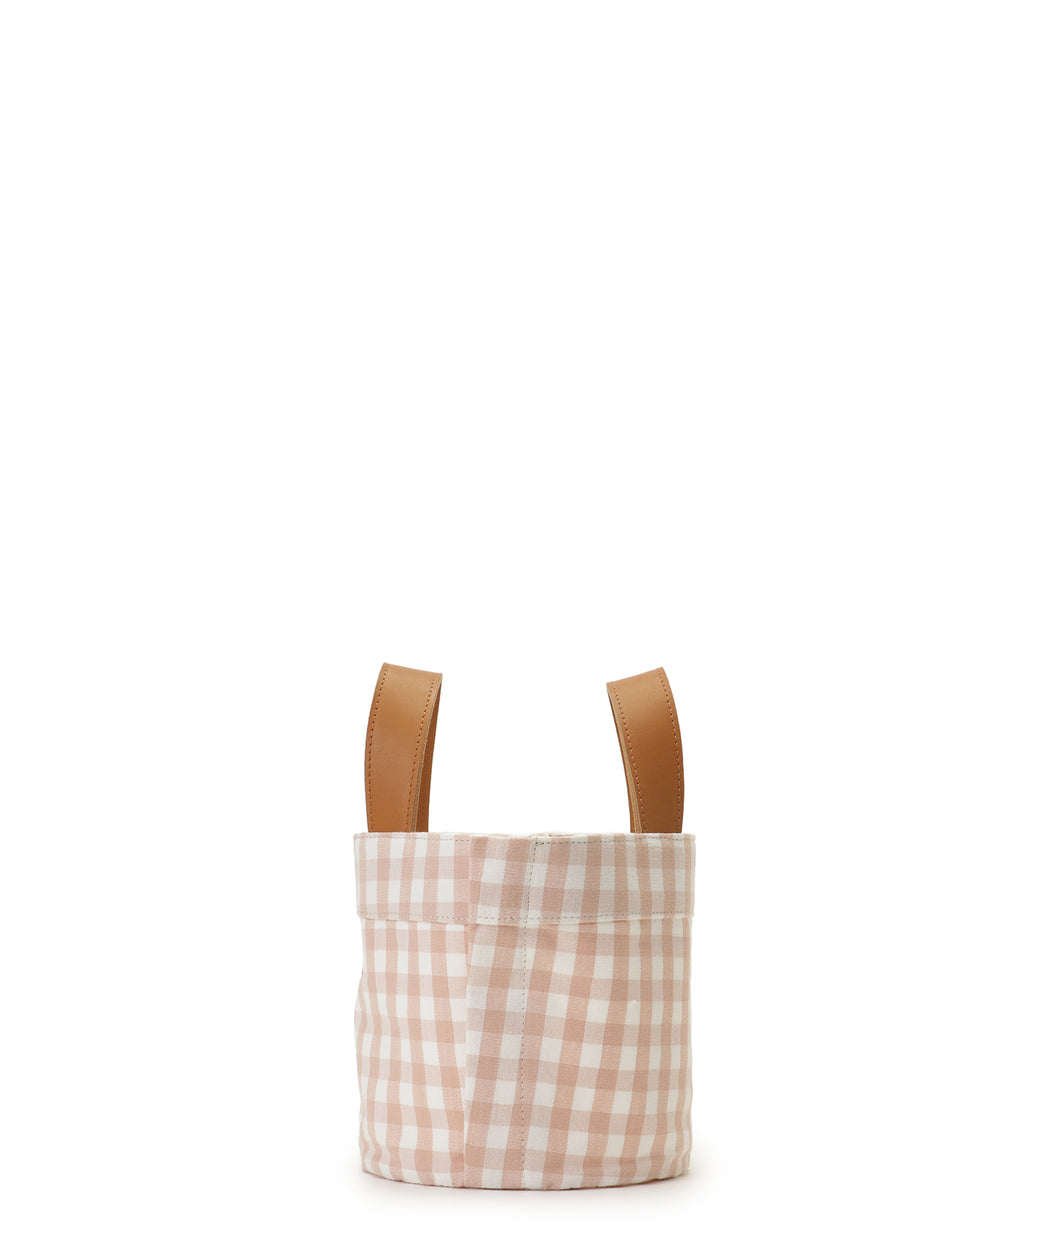 Gingham check tote XS